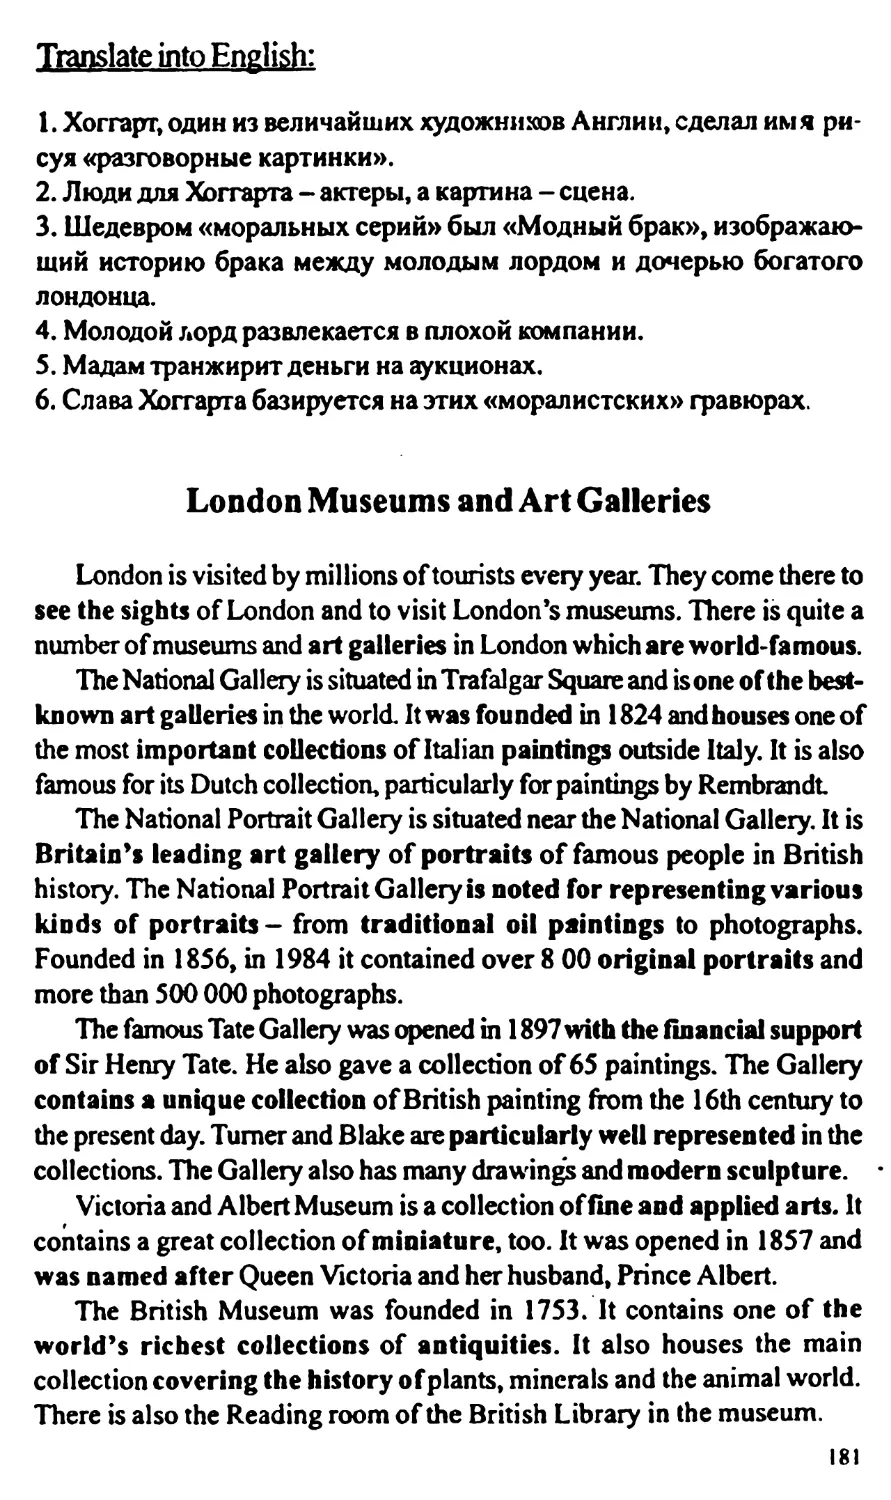 London Museums and Art Galleries